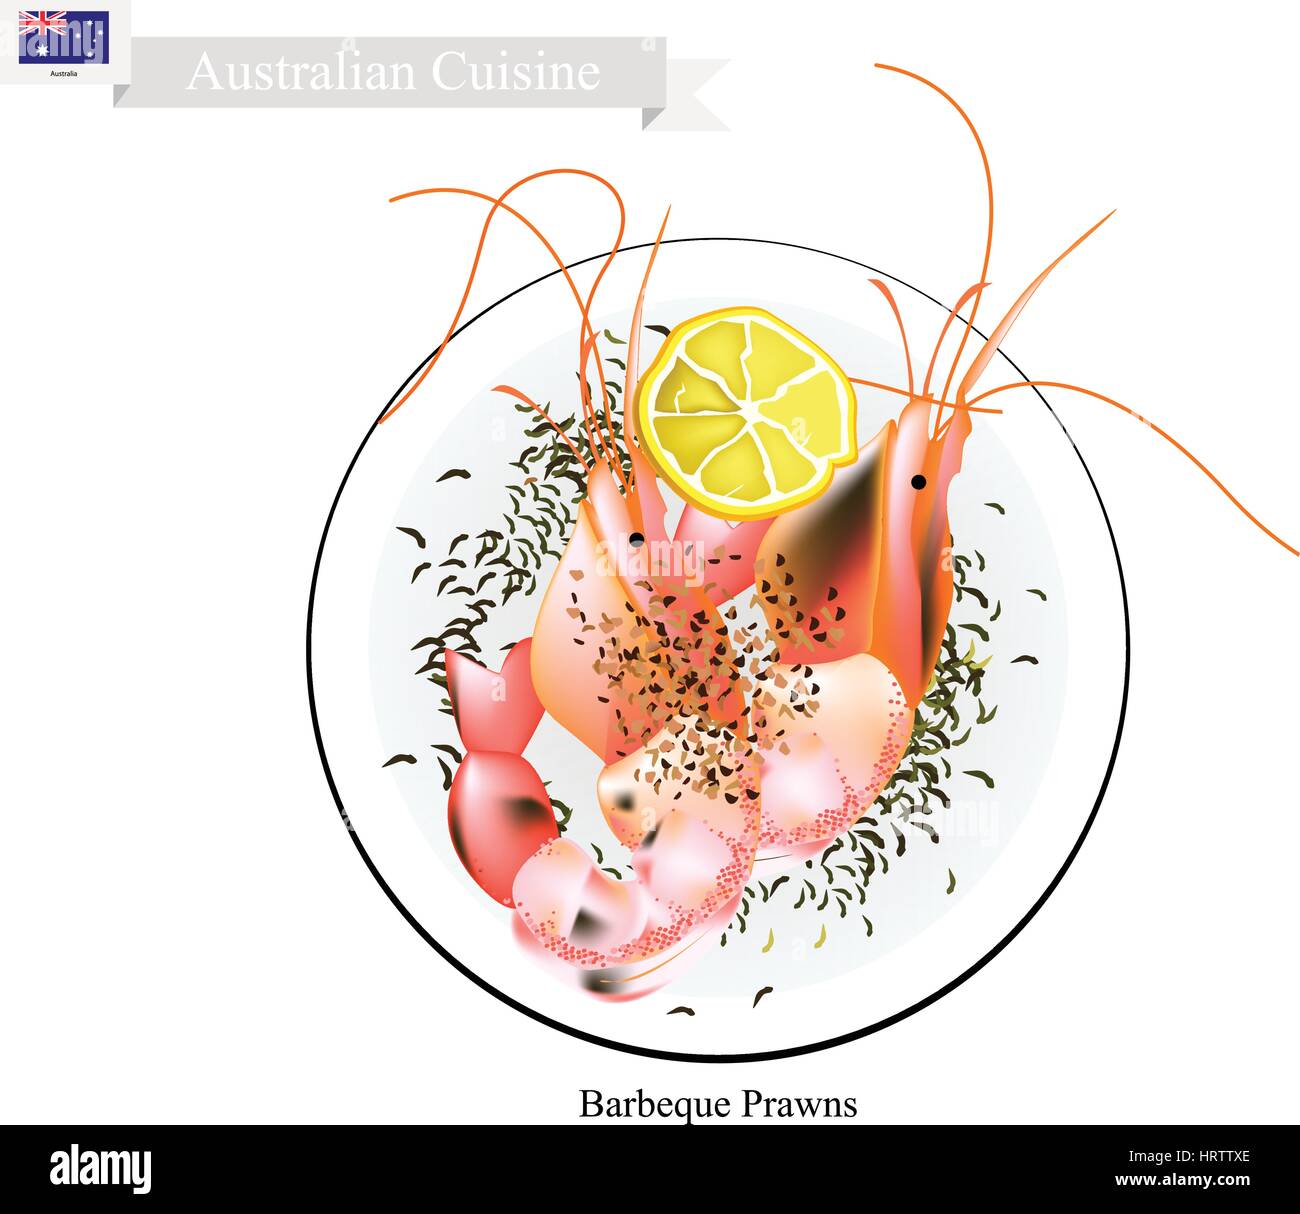 Australian Cuisine, Illustration of Traditional Barbecued Prawns or BBQ Garlic Prawns. One of Most Popular Dish in Australia. Stock Vector